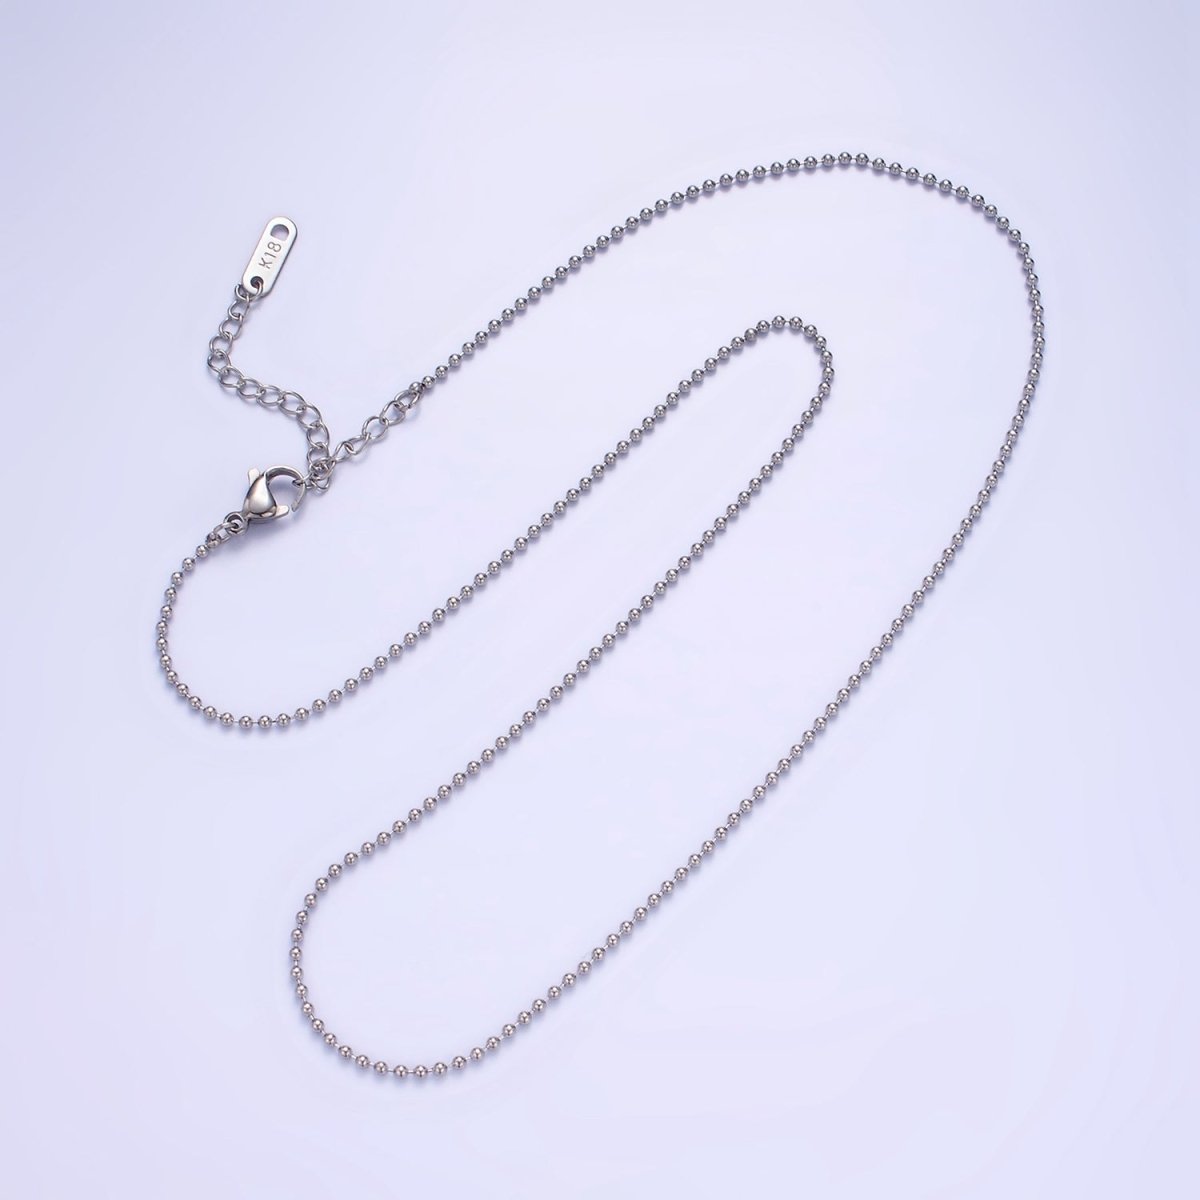 Stainless Steel 1.3mm Bead Chain 18 Inch Necklace w. Extender in Gold & Silver | WA-2480 WA-2481 - DLUXCA